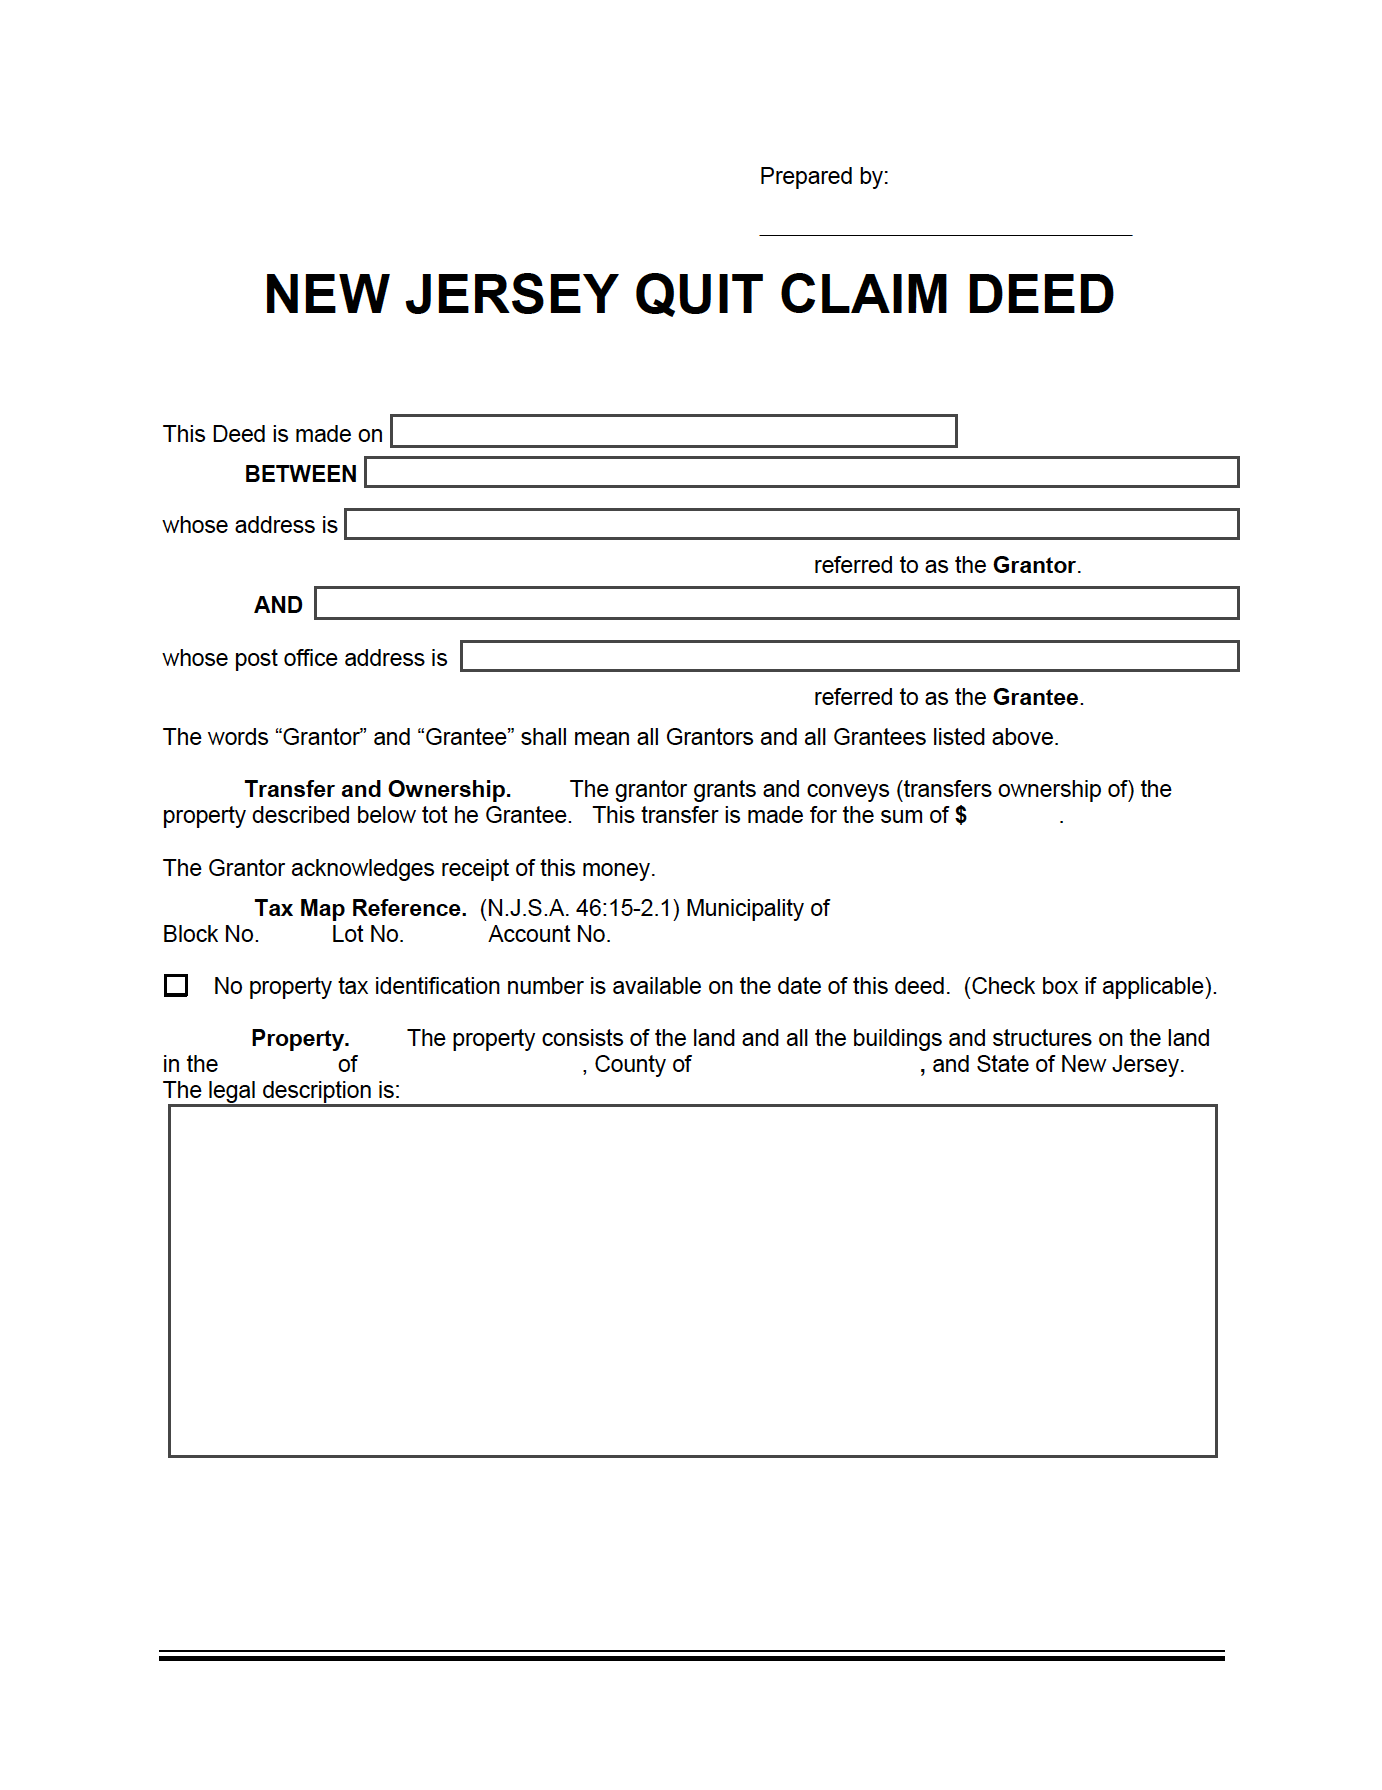 free-new-jersey-quit-claim-deed-form-pdf